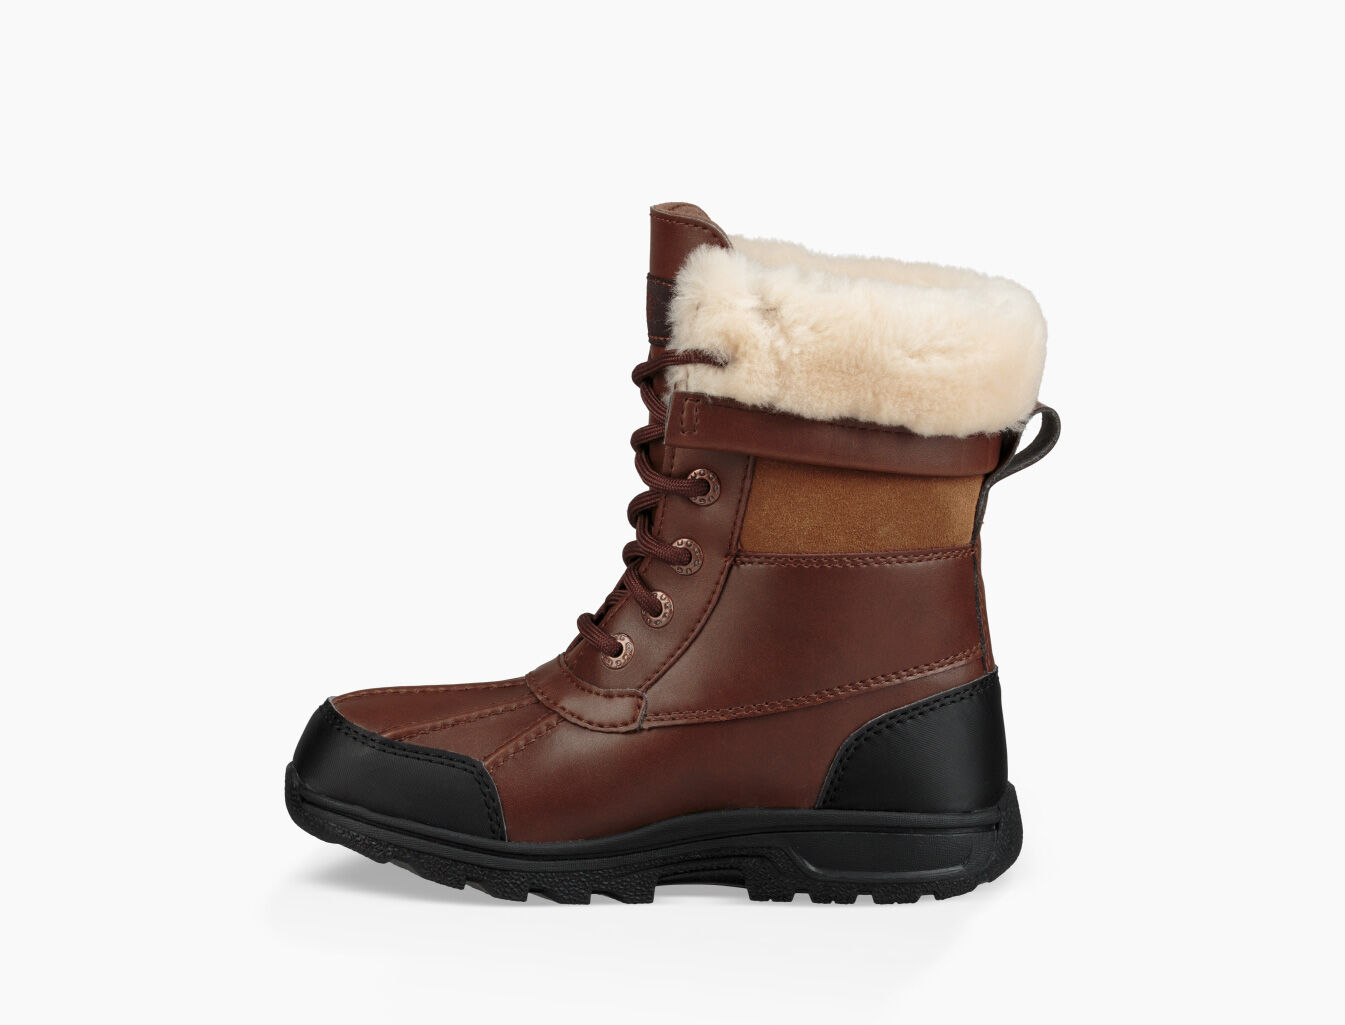 ugg butte ii youth snow boot